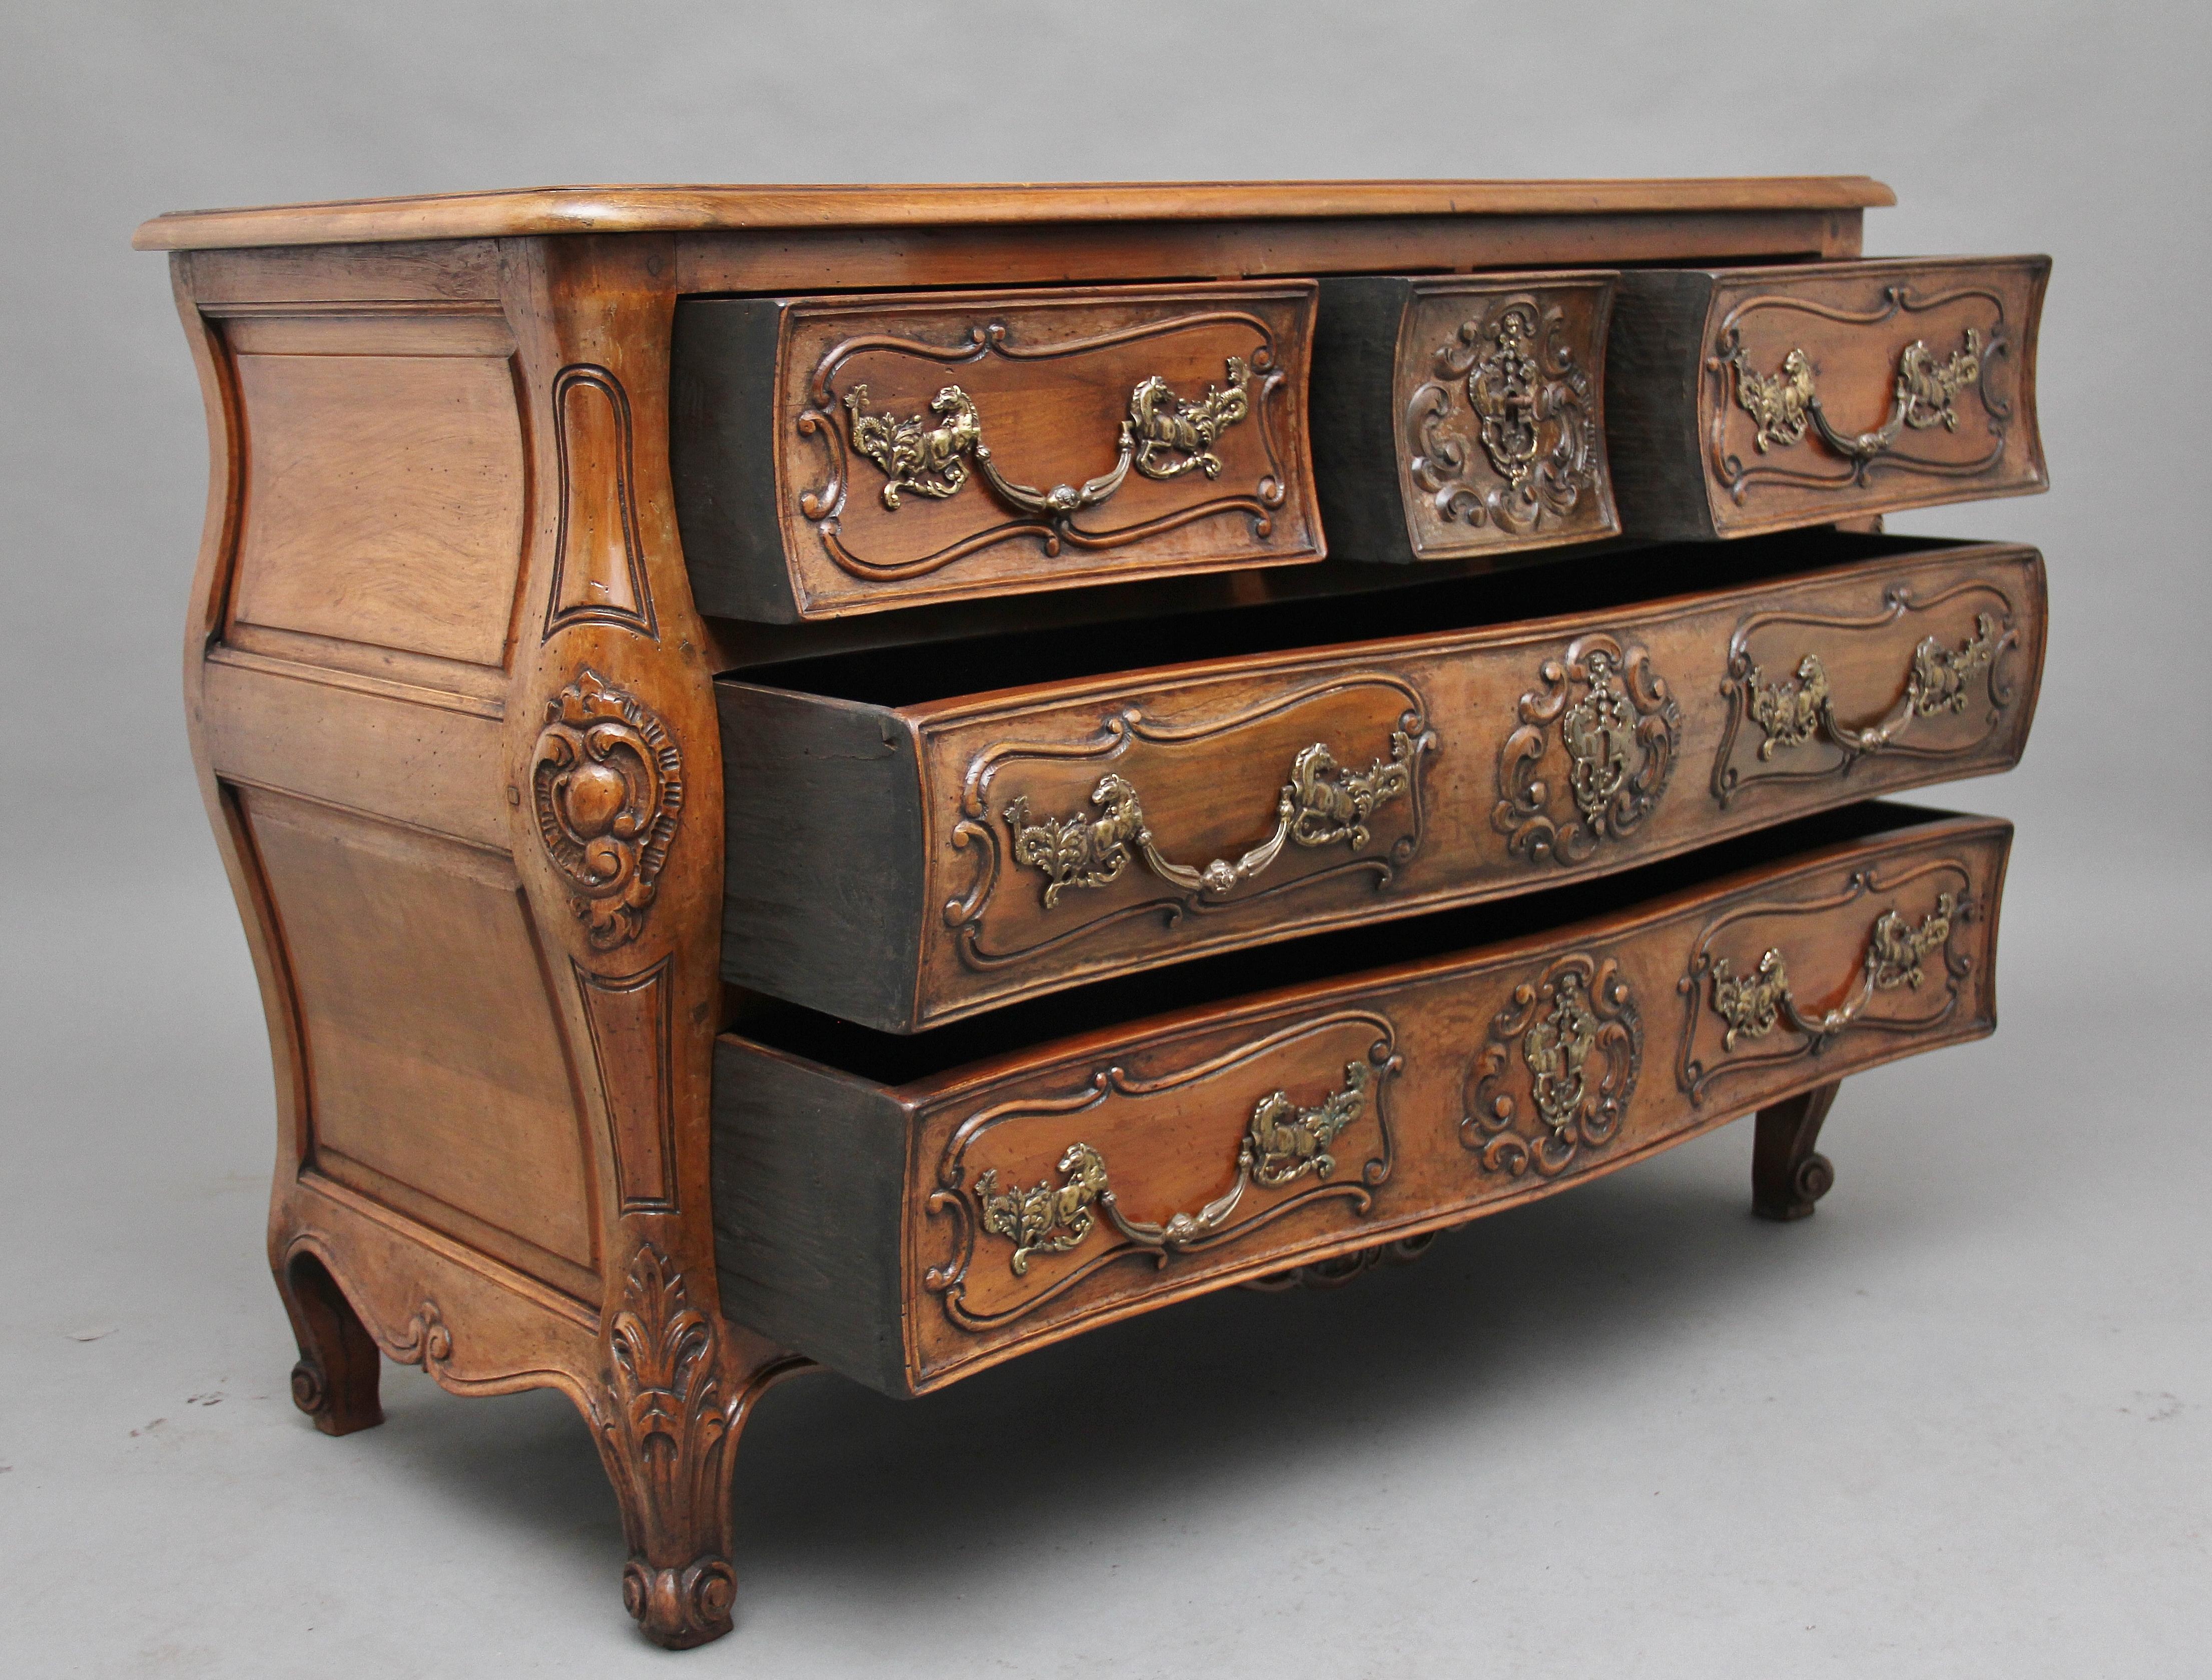 Early 20th Century Fruitwood Commode In Good Condition For Sale In Martlesham, GB